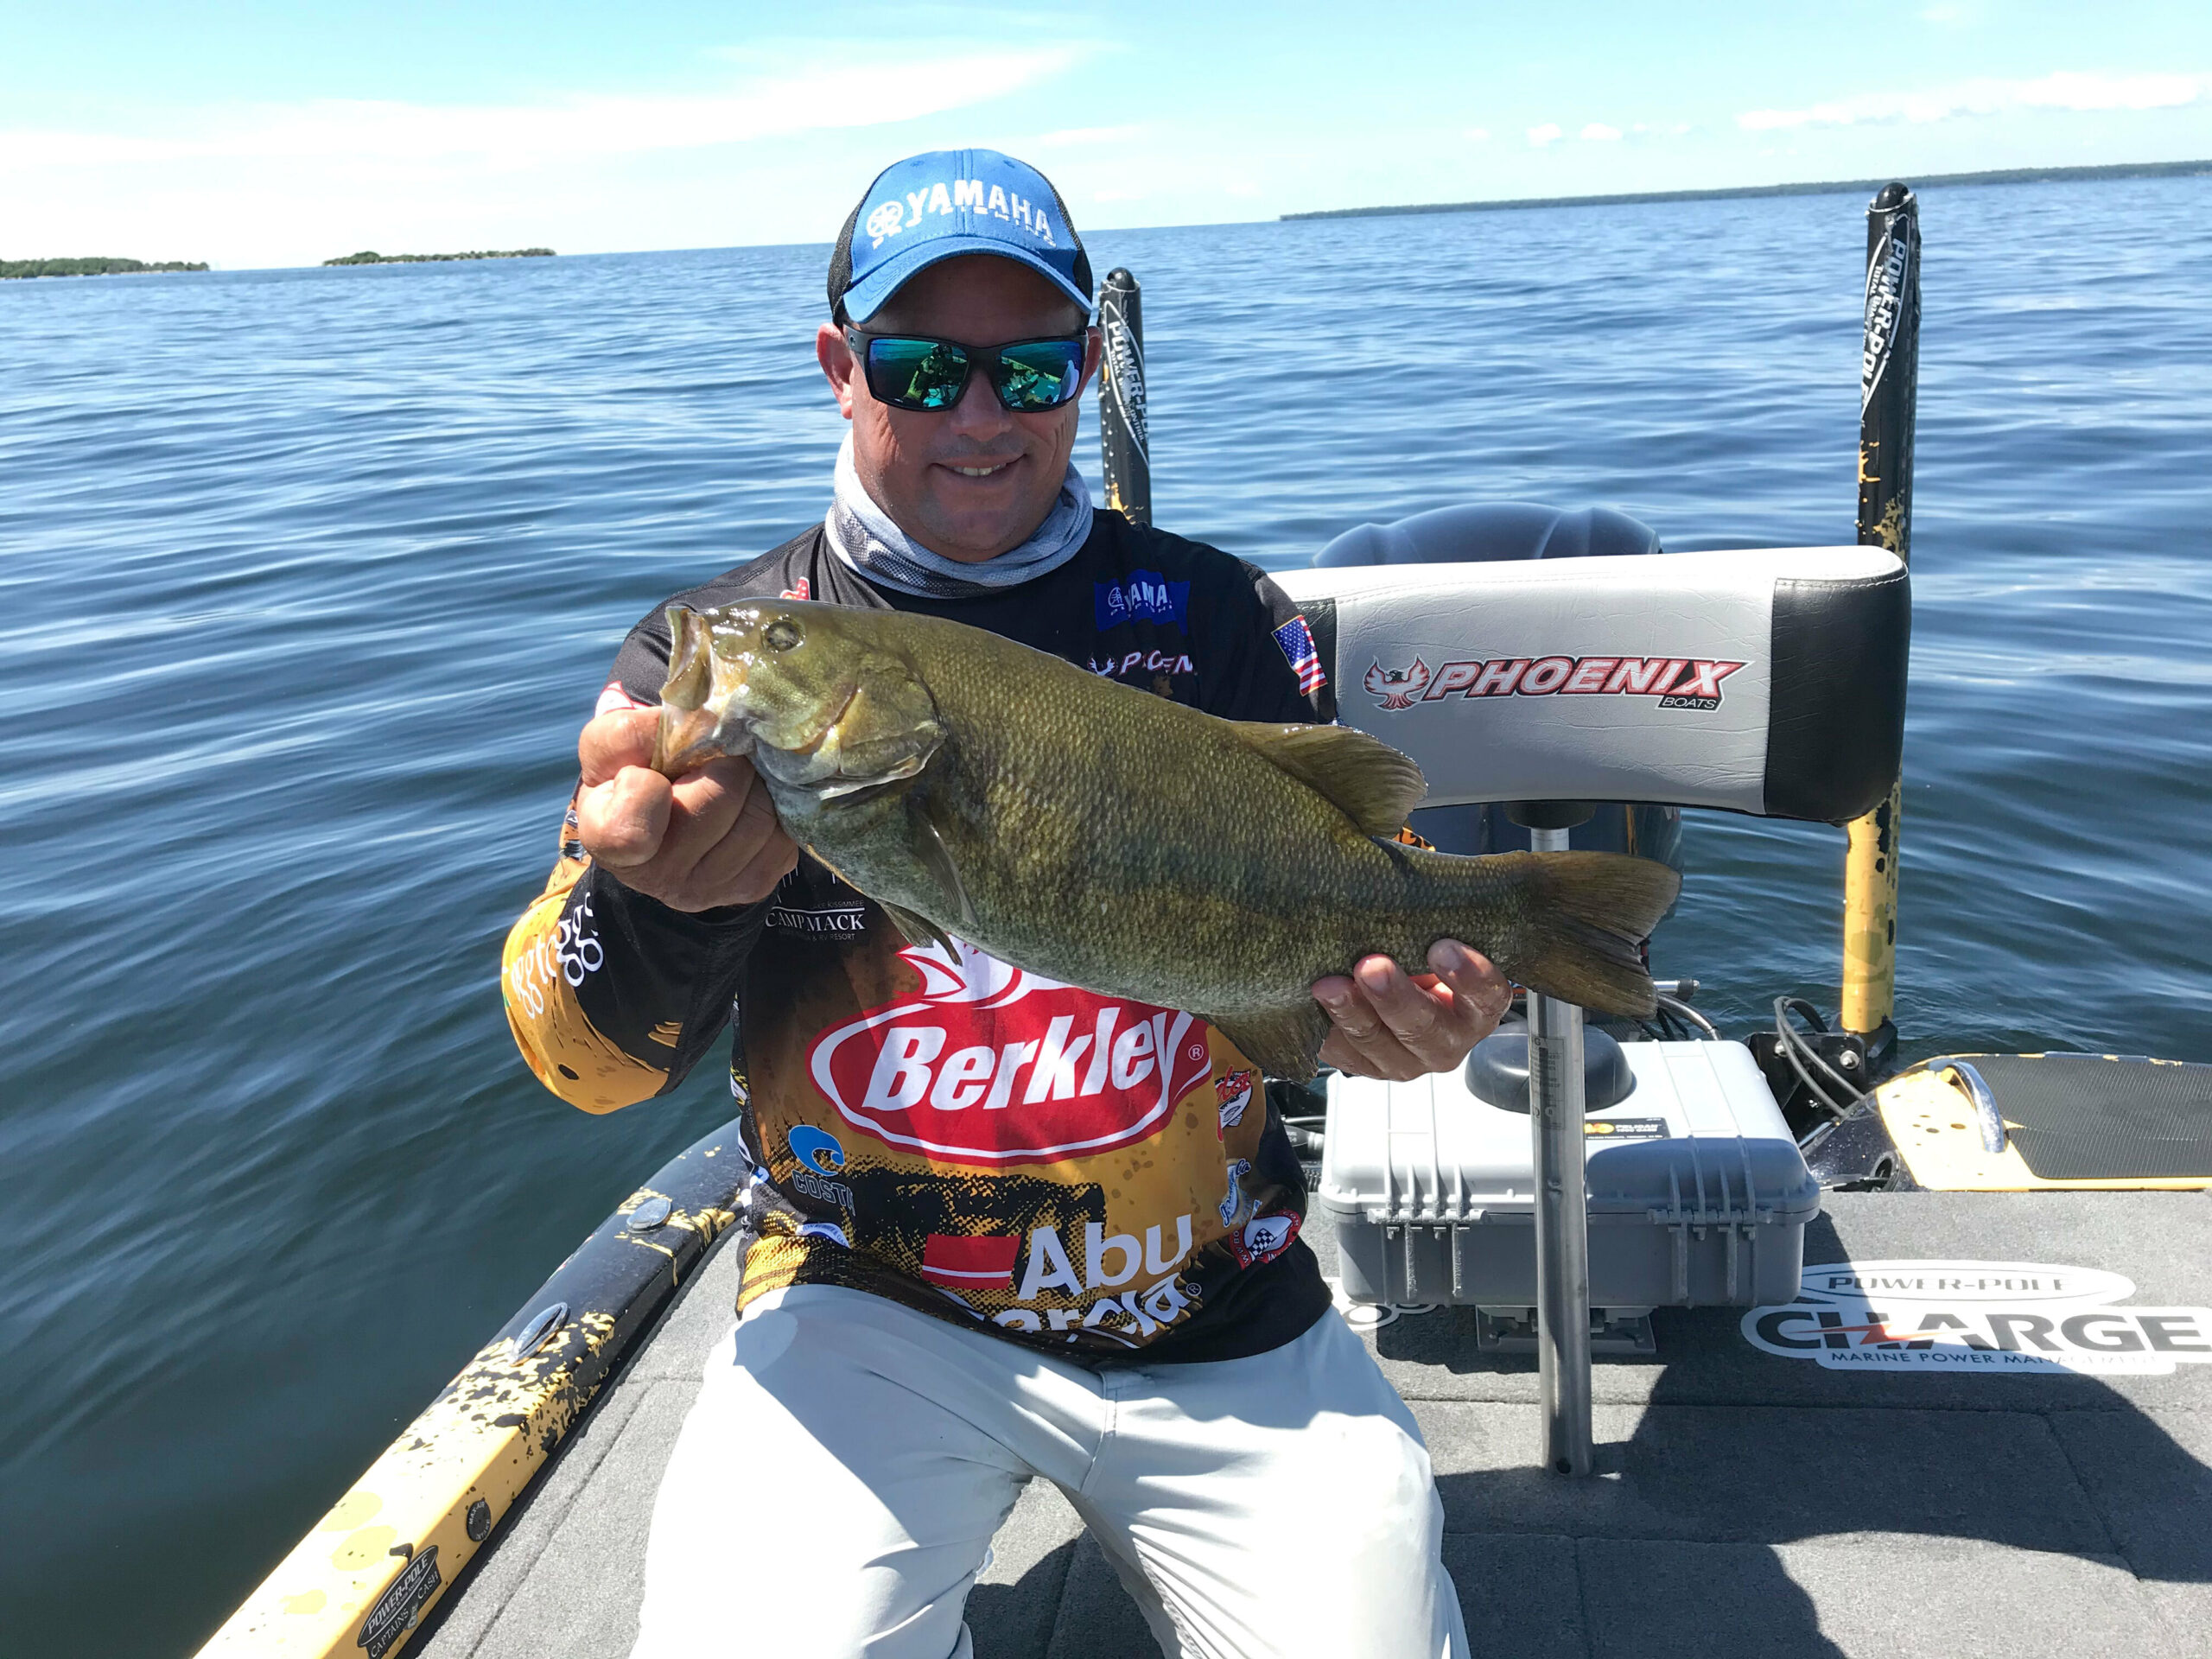 LIVE BLOG: Pace Earns Trip to Championship Round, DeFoe Last Man in Top 20  - Major League Fishing